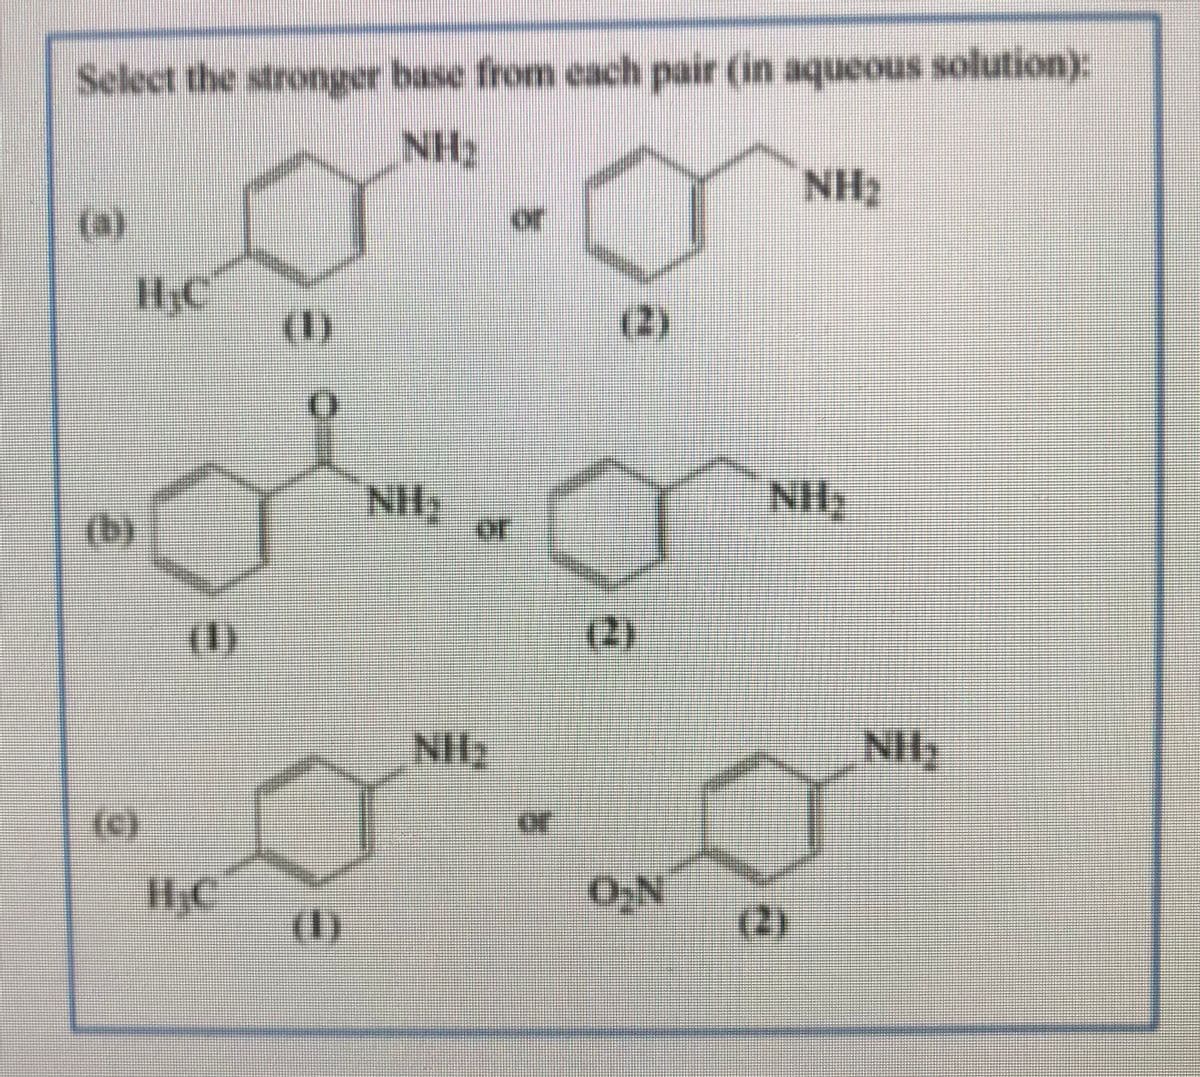 Select the stronger base from cach pair (in aqueous solution):
NH2
NH2
or
(3)
H;C
(2)
()
or
()
(2)
or
(c)
(1)
(2)
